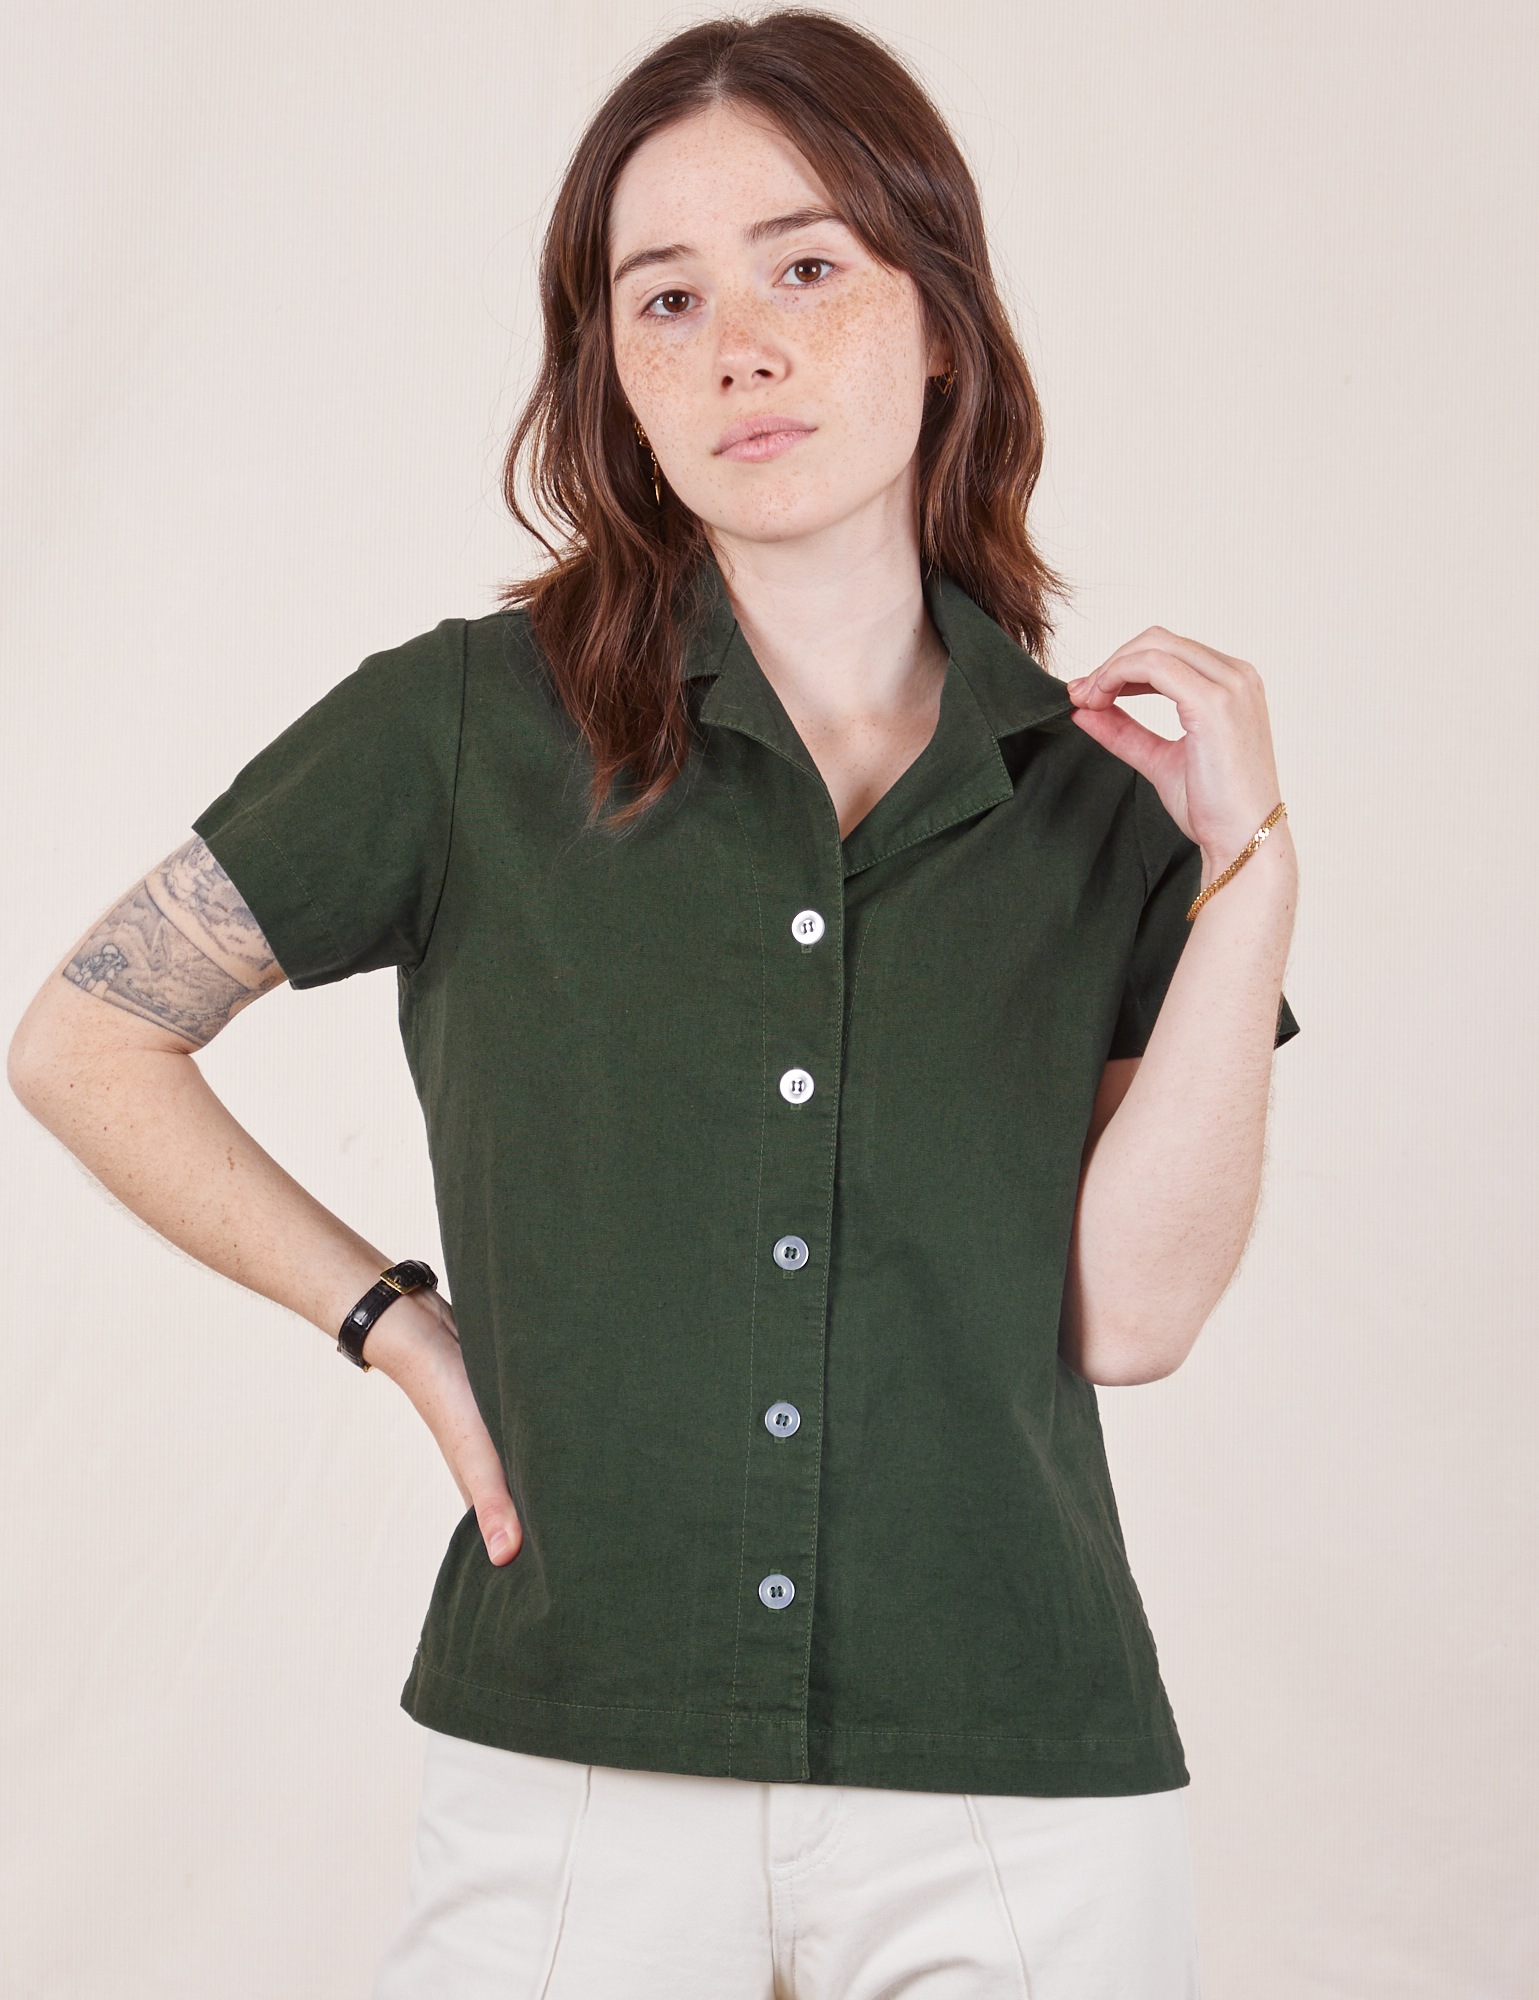 Hana is 5'3" and wearing P Pantry Button-Up in Swamp Green